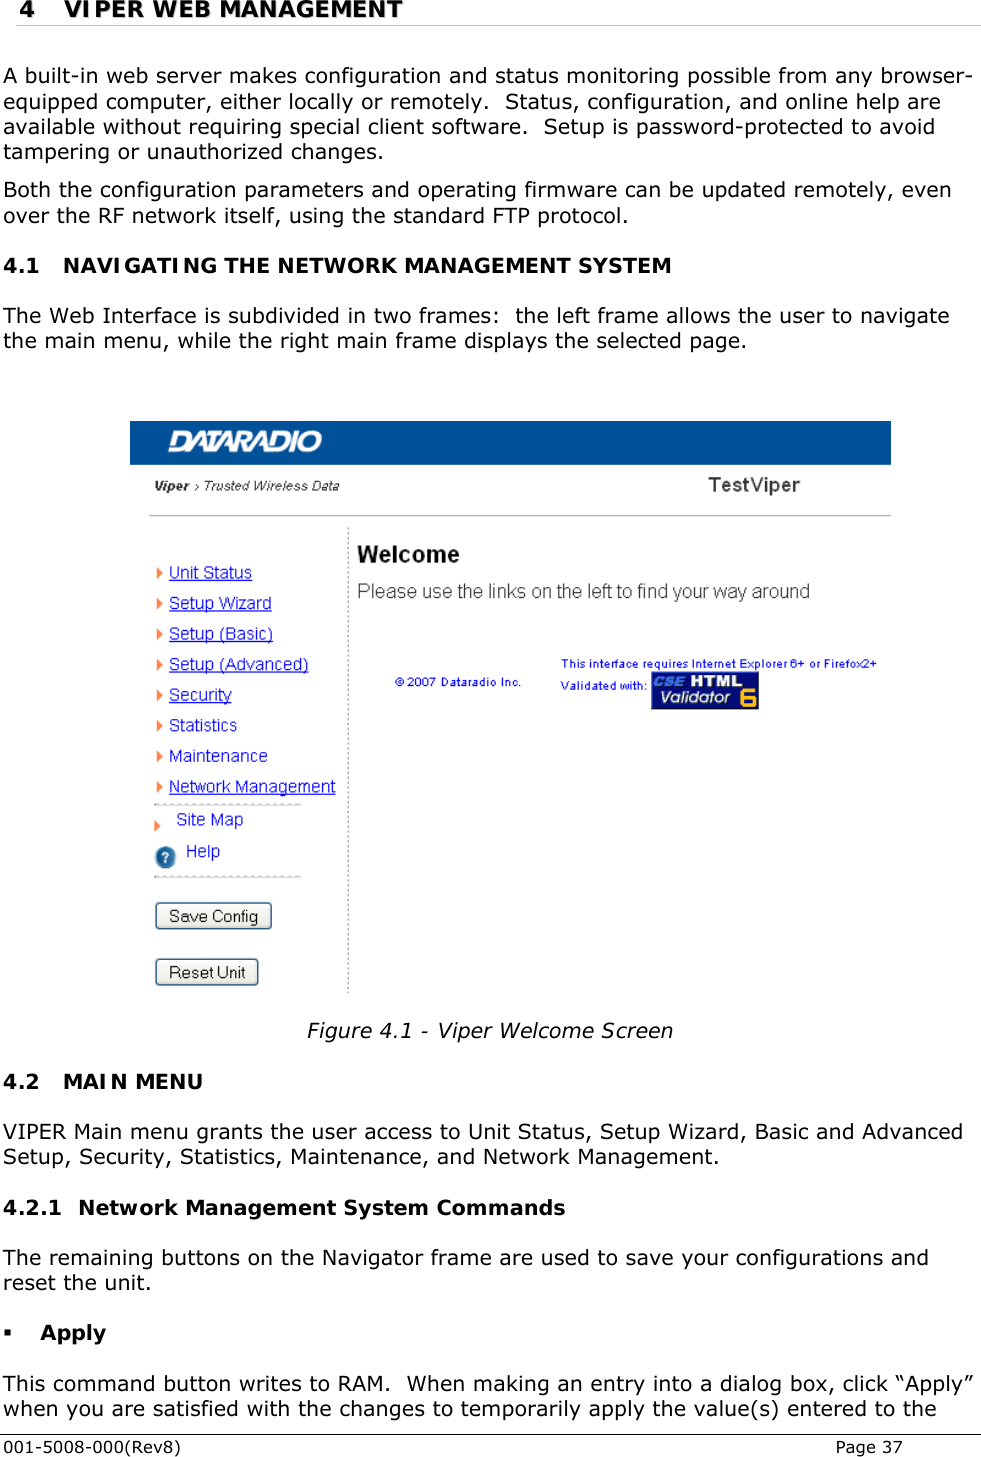  001-5008-000(Rev8)   Page 37 44  VVIIPPEERR  WWEEBB  MMAANNAAGGEEMMEENNTT  A built-in web server makes configuration and status monitoring possible from any browser-equipped computer, either locally or remotely.  Status, configuration, and online help are available without requiring special client software.  Setup is password-protected to avoid tampering or unauthorized changes.  Both the configuration parameters and operating firmware can be updated remotely, even over the RF network itself, using the standard FTP protocol. 4.1 NAVIGATING THE NETWORK MANAGEMENT SYSTEM The Web Interface is subdivided in two frames:  the left frame allows the user to navigate the main menu, while the right main frame displays the selected page.    Figure 4.1 - Viper Welcome Screen 4.2 MAIN MENU VIPER Main menu grants the user access to Unit Status, Setup Wizard, Basic and Advanced Setup, Security, Statistics, Maintenance, and Network Management.  4.2.1 Network Management System Commands The remaining buttons on the Navigator frame are used to save your configurations and reset the unit.  Apply This command button writes to RAM.  When making an entry into a dialog box, click “Apply” when you are satisfied with the changes to temporarily apply the value(s) entered to the 